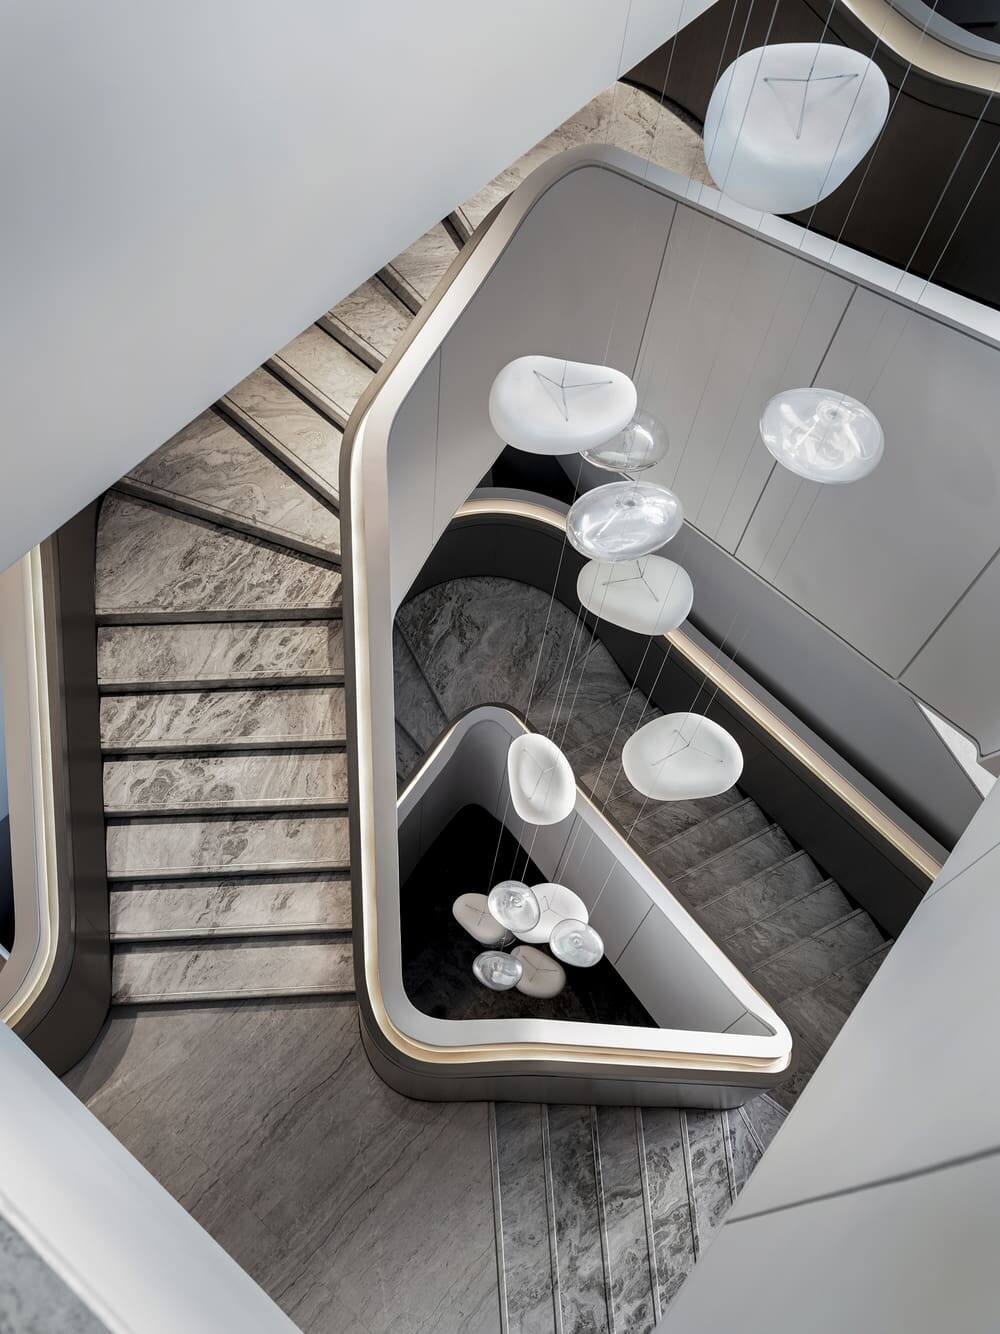 Artworks-in-stairwell, CCD / Cheng Chung Design